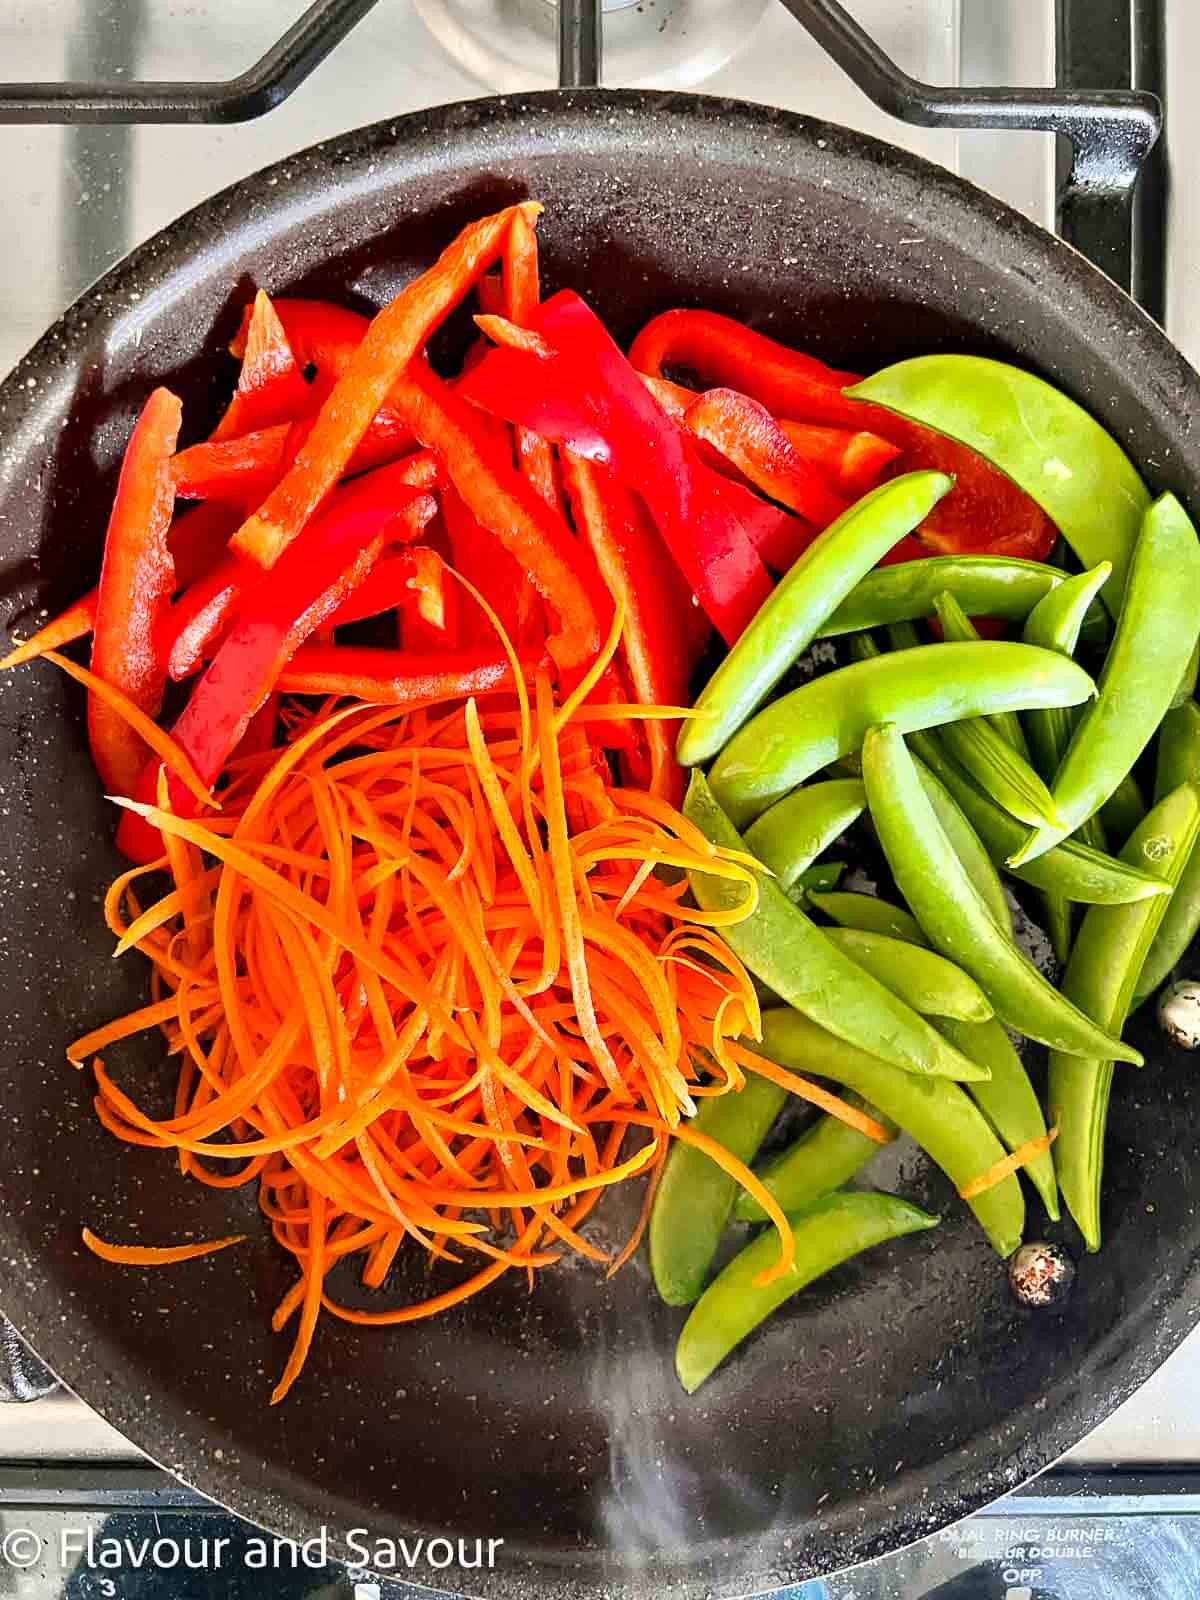 Snow peas, carrots and red pepper strips in a skillet.